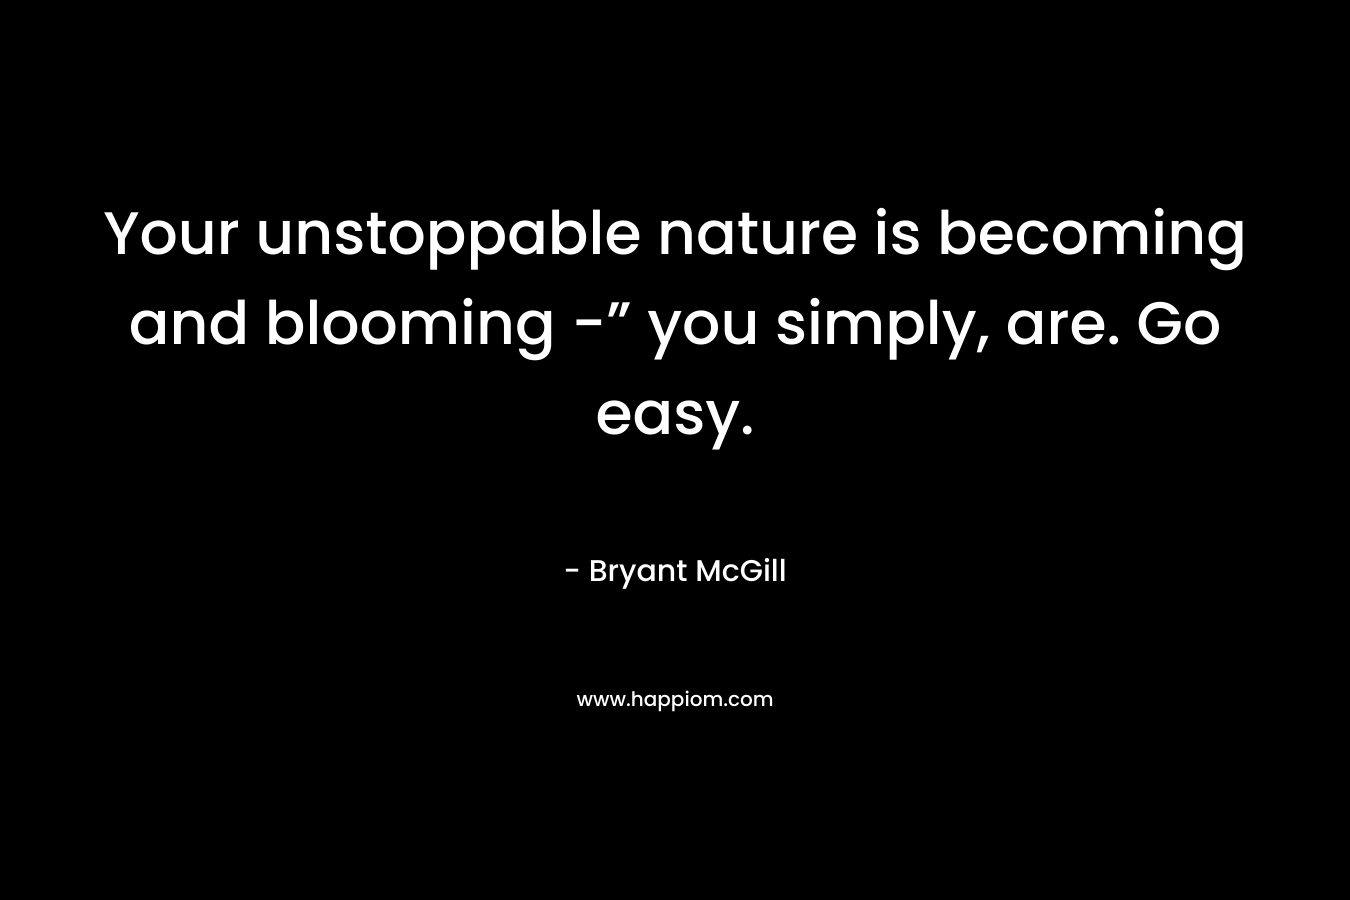 Your unstoppable nature is becoming and blooming -” you simply, are. Go easy. – Bryant McGill